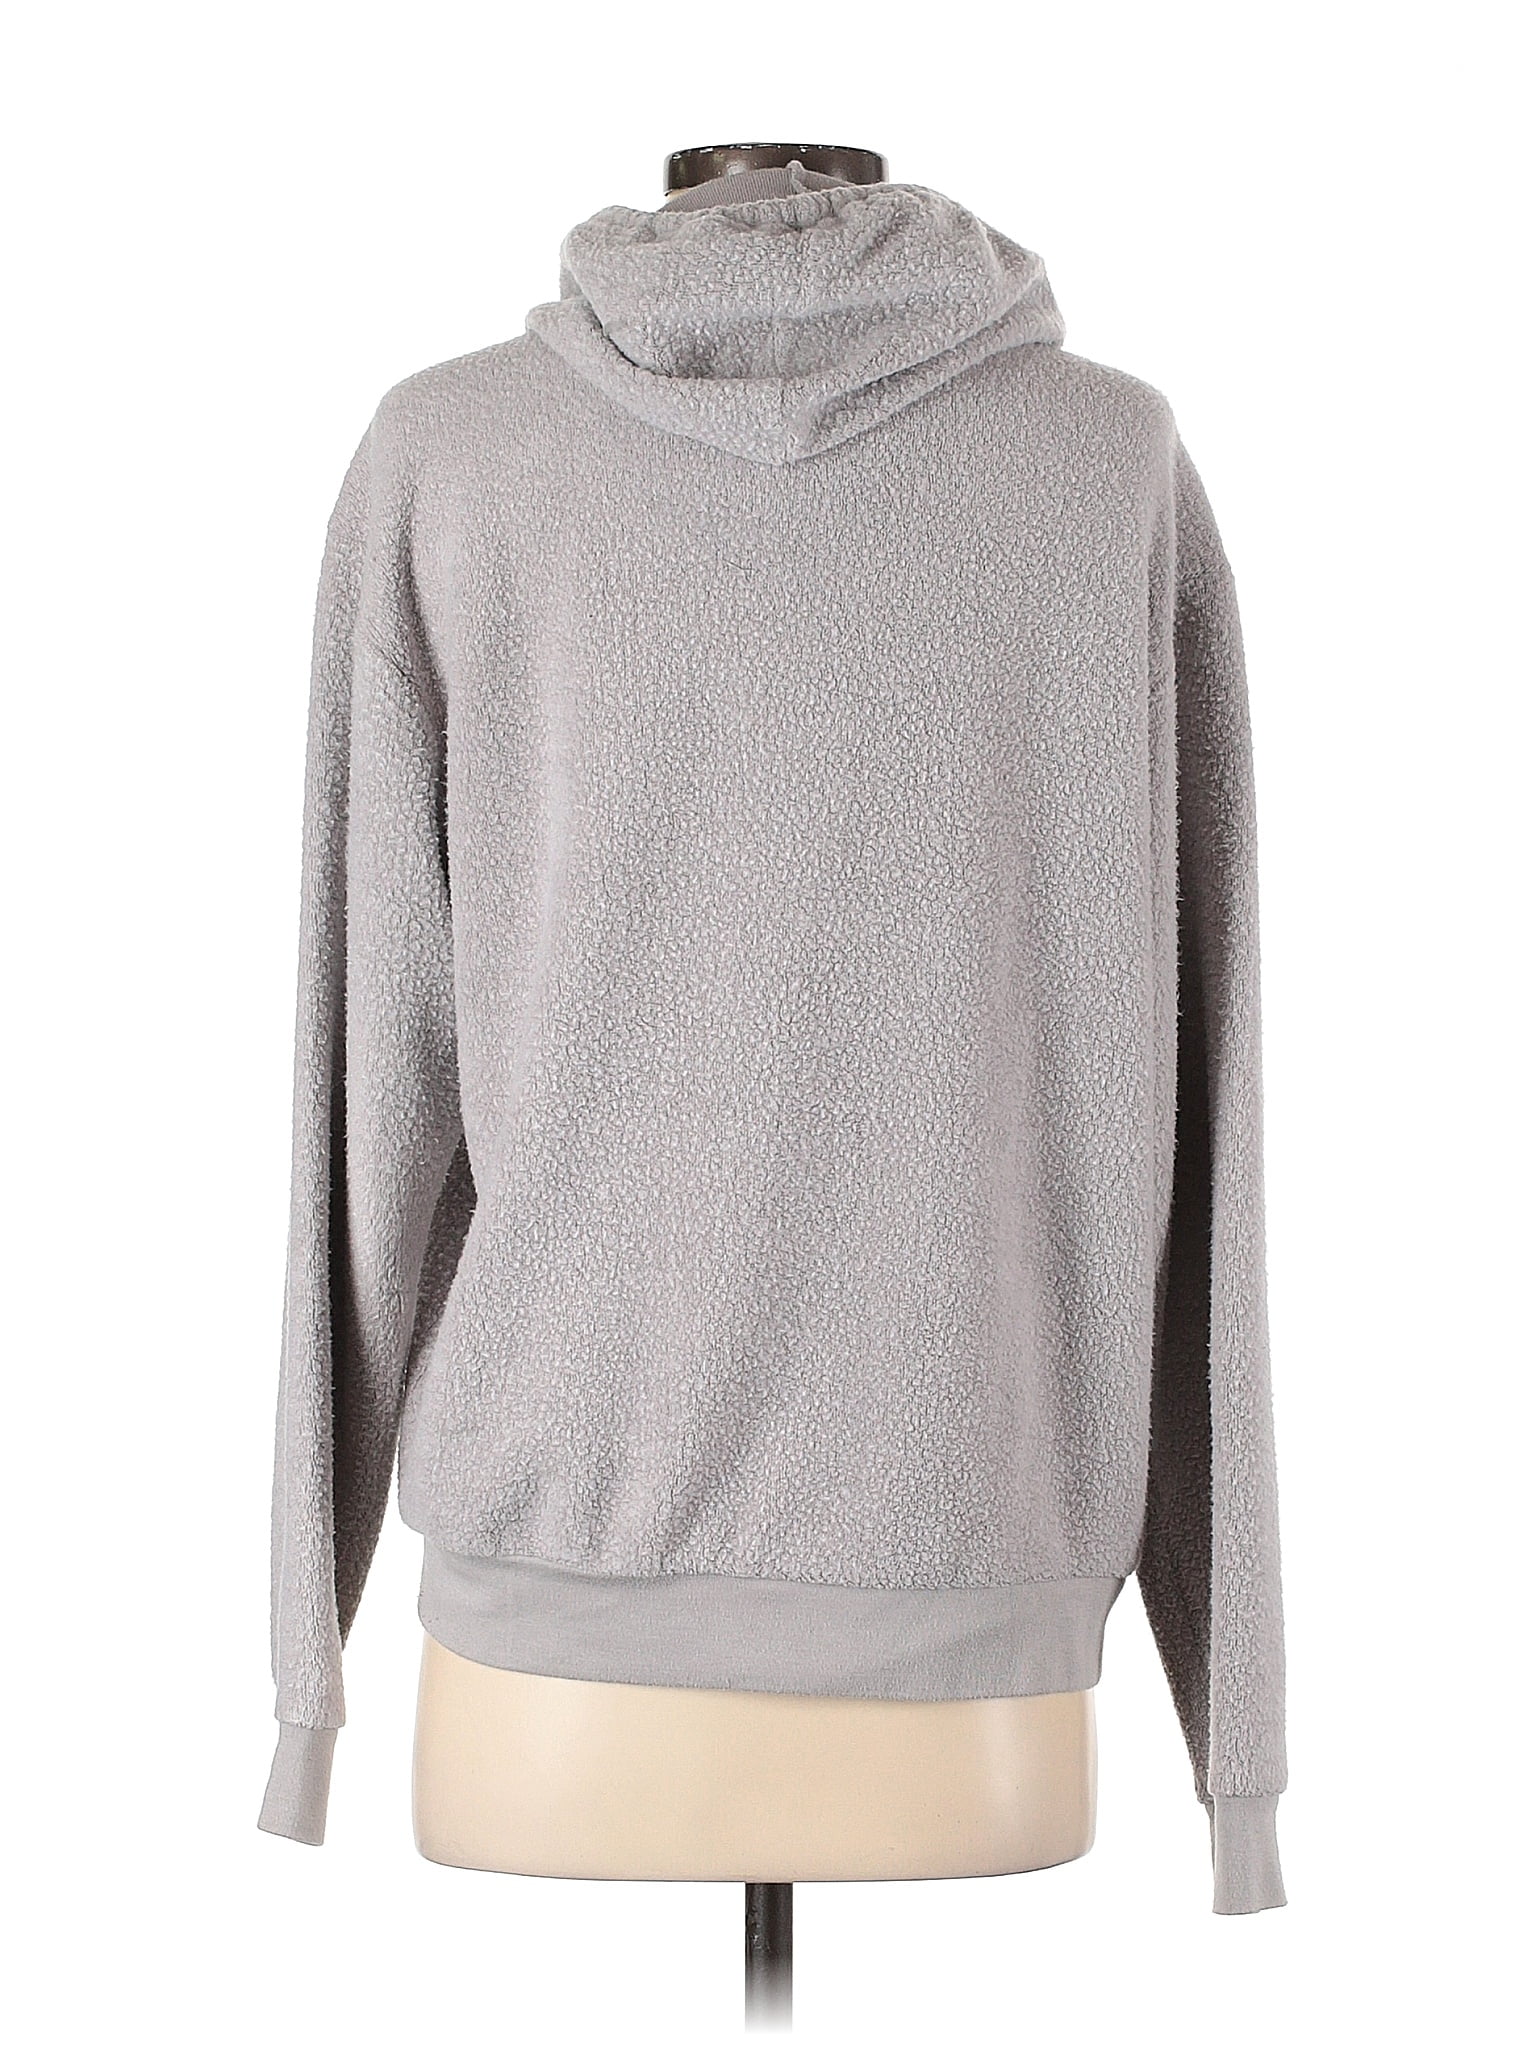 Lululemon Athletica Solid Gray Zip Up Hoodie Size 8 - 48% off